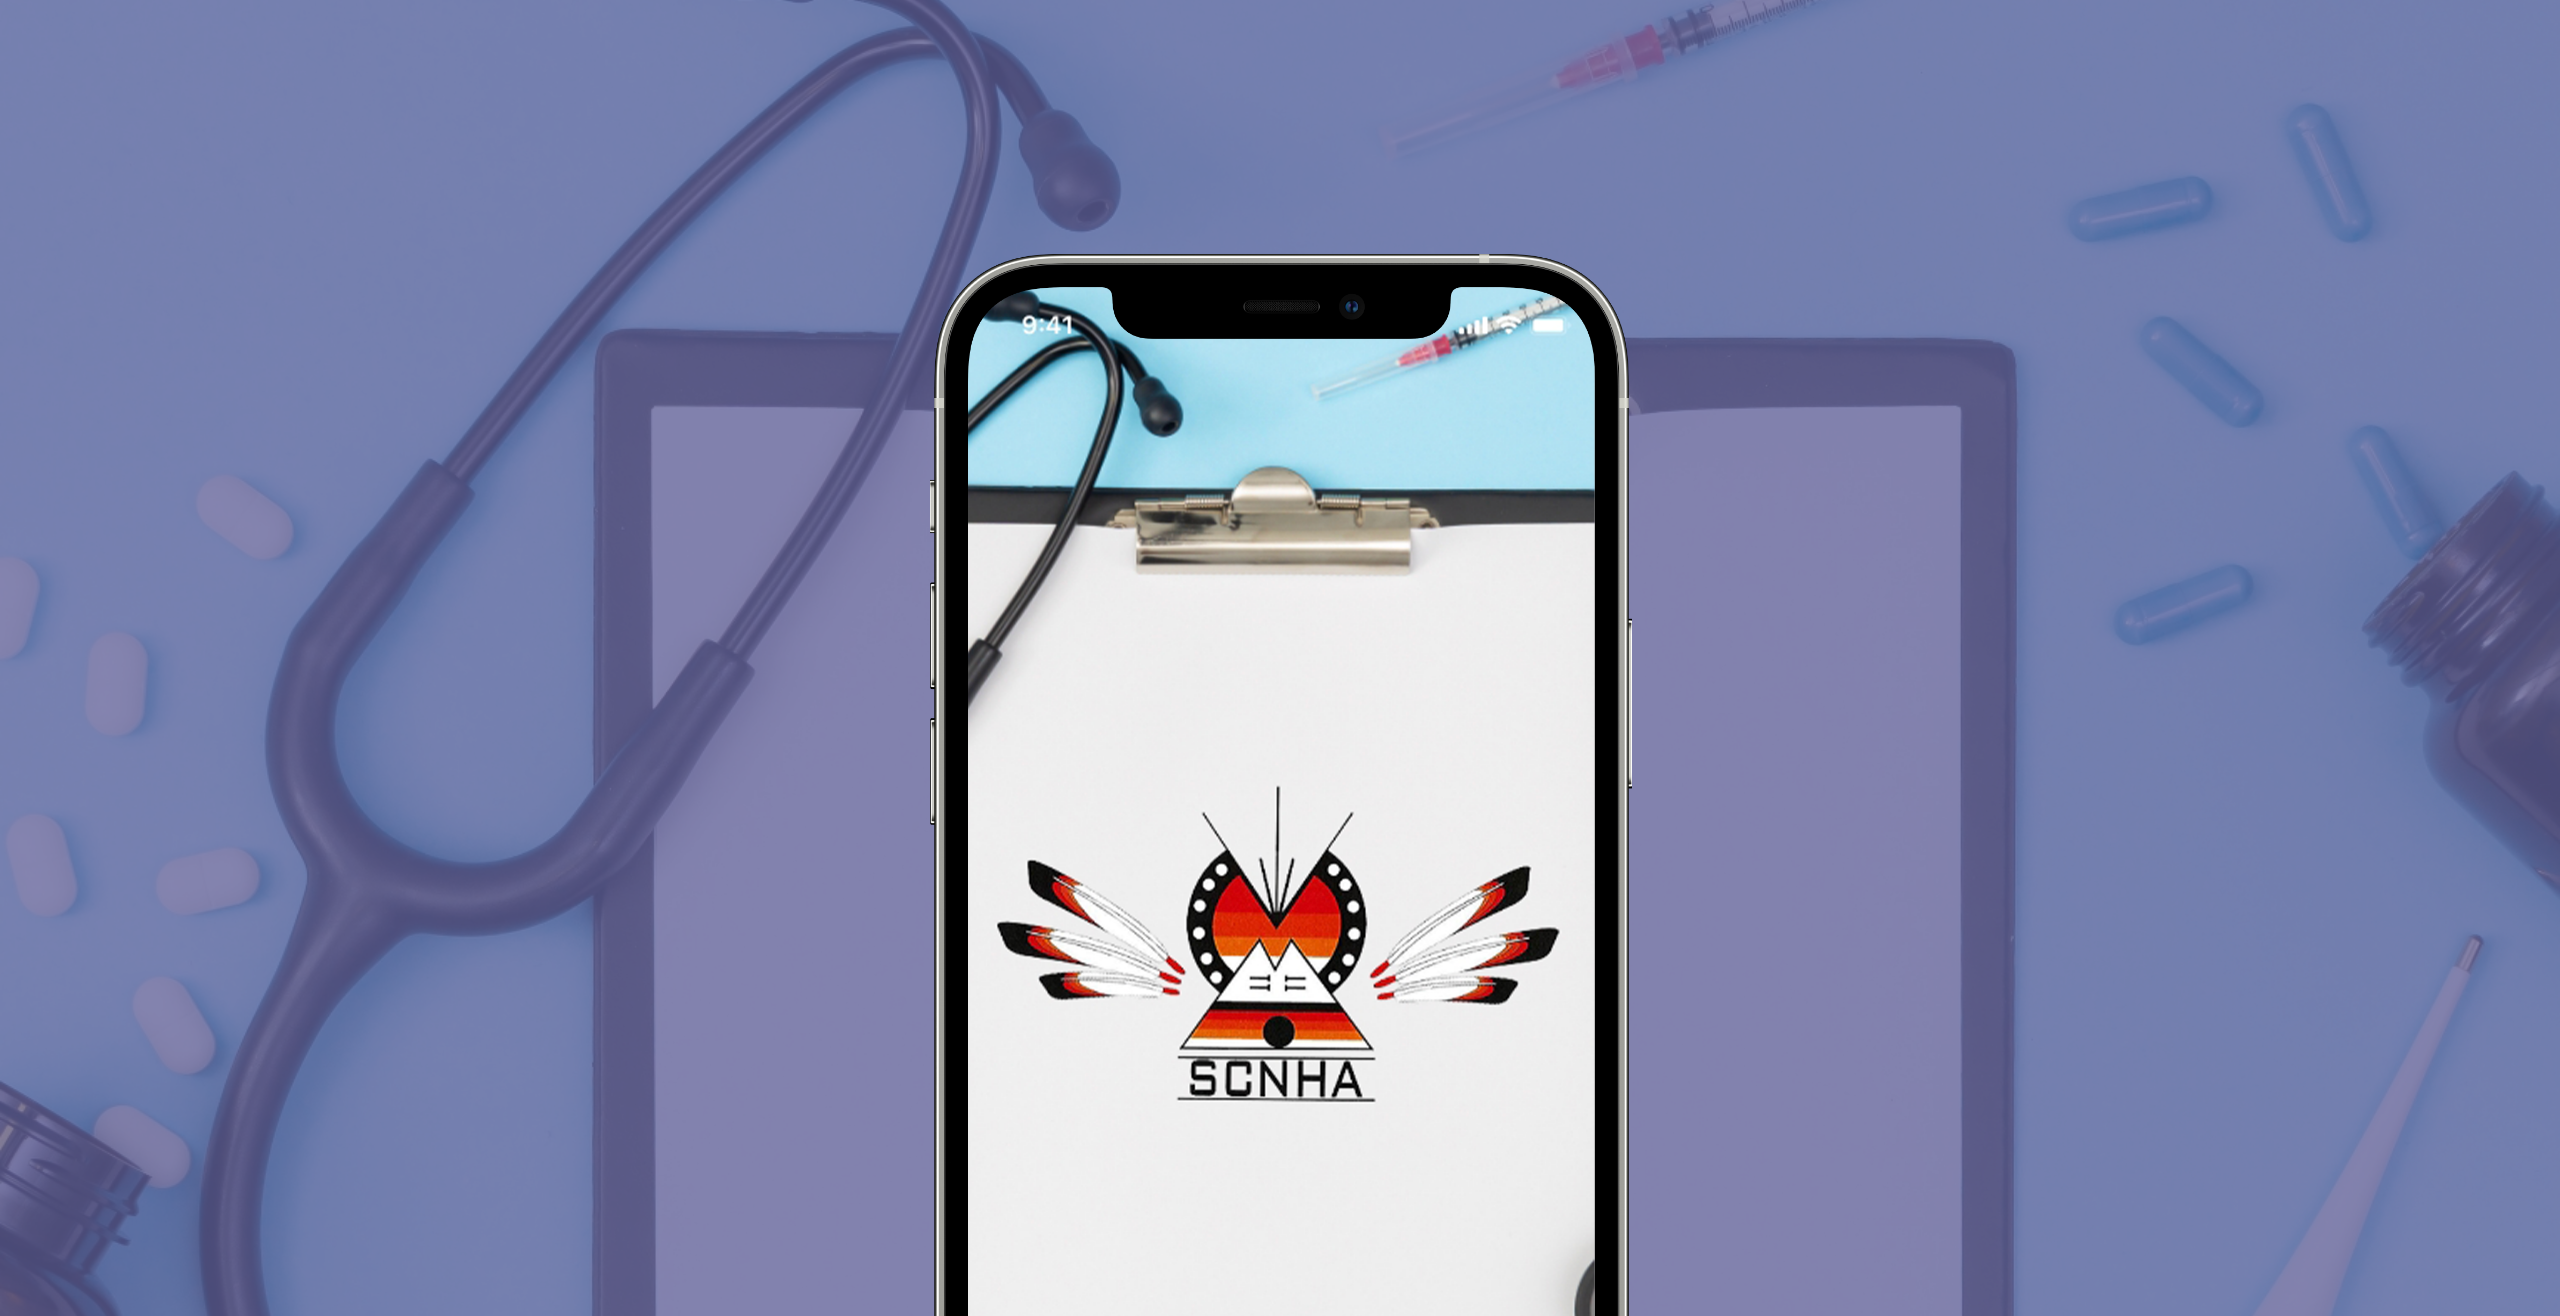 The SCNHA mobile app displayed on a screen in front of a medical themed background. 